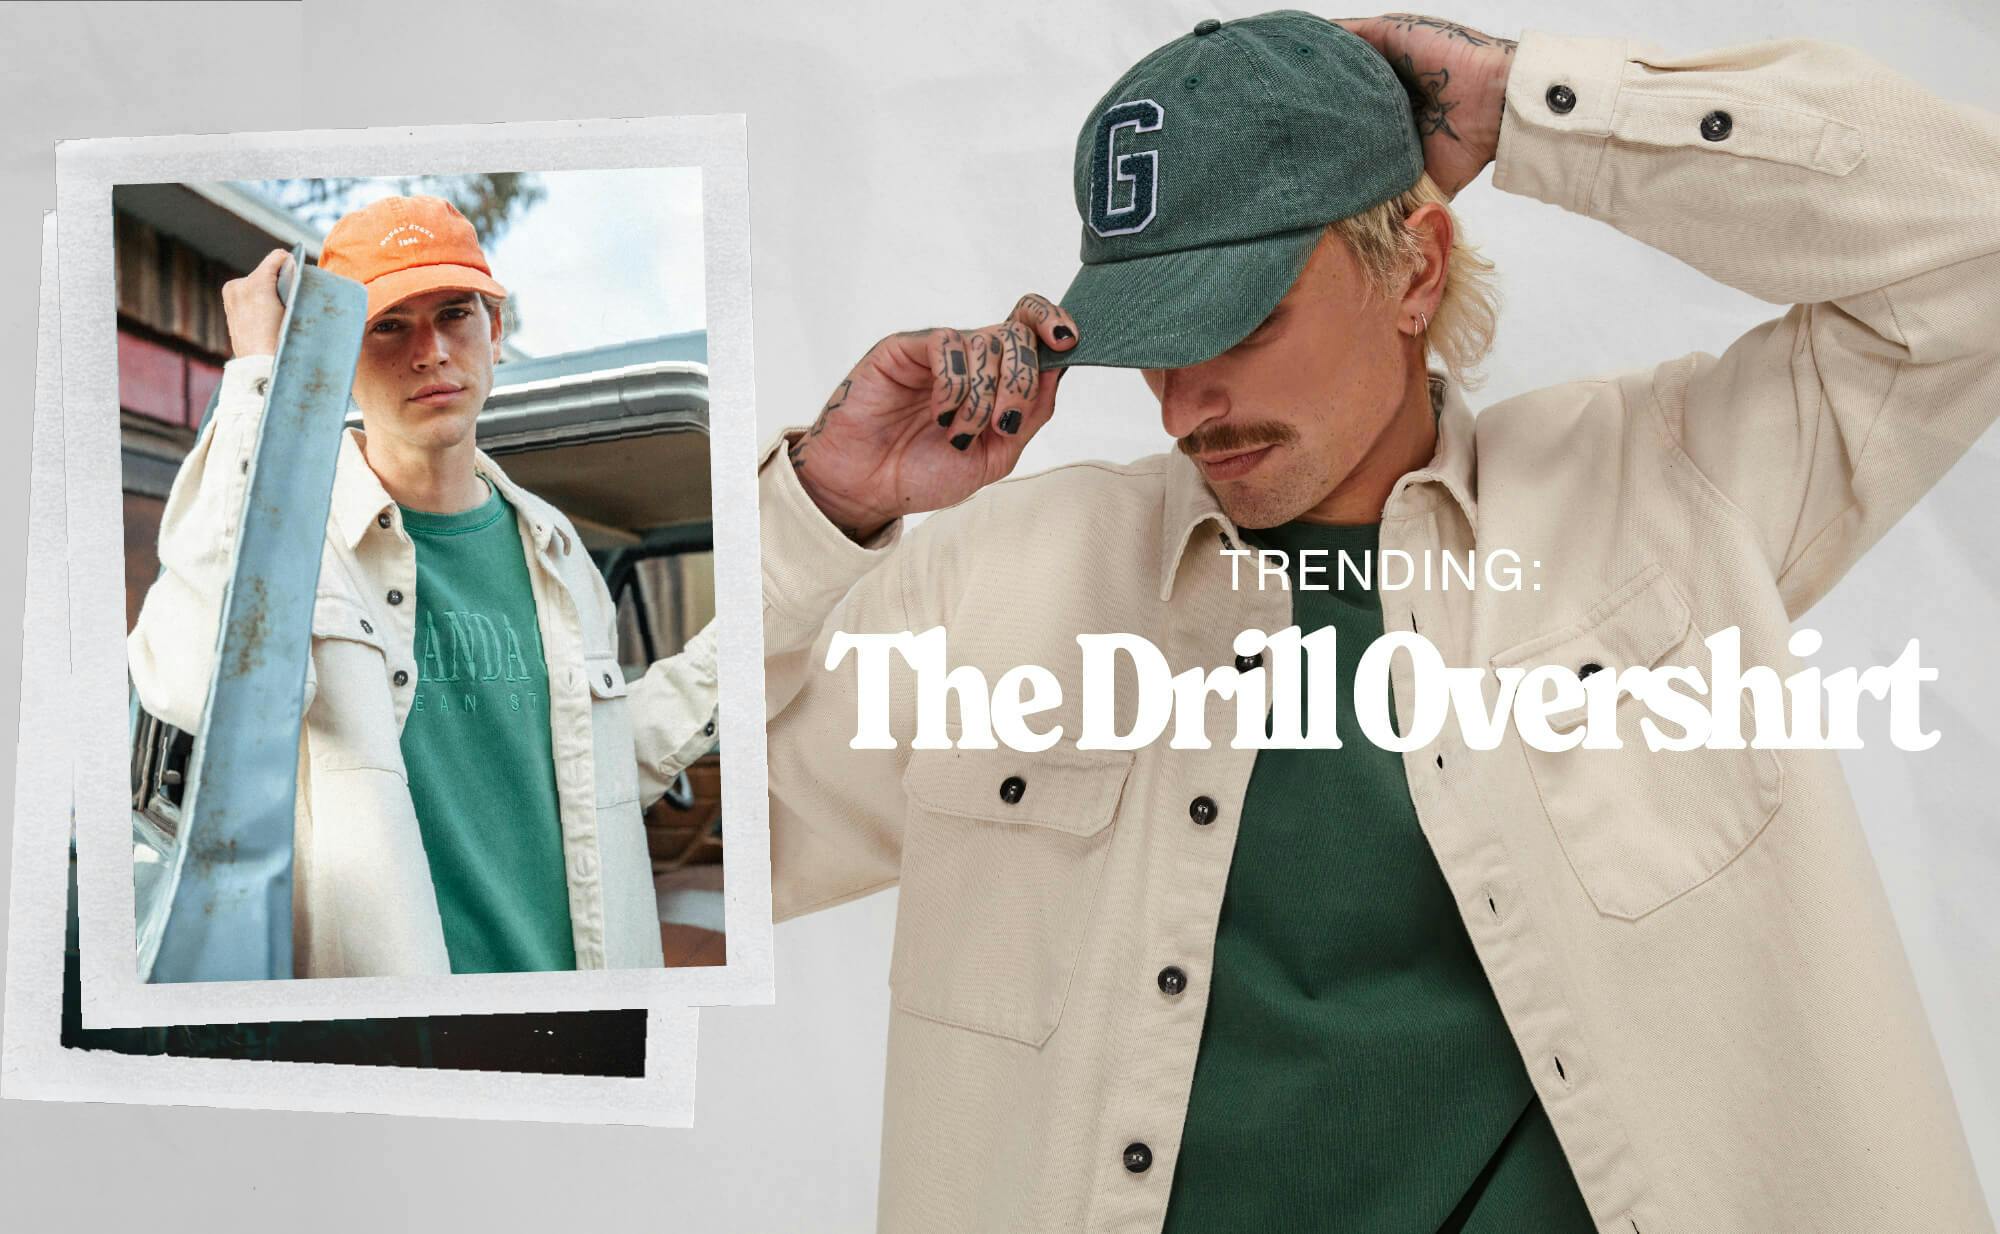 Banner features image of male model wearing the Drill Overshirt